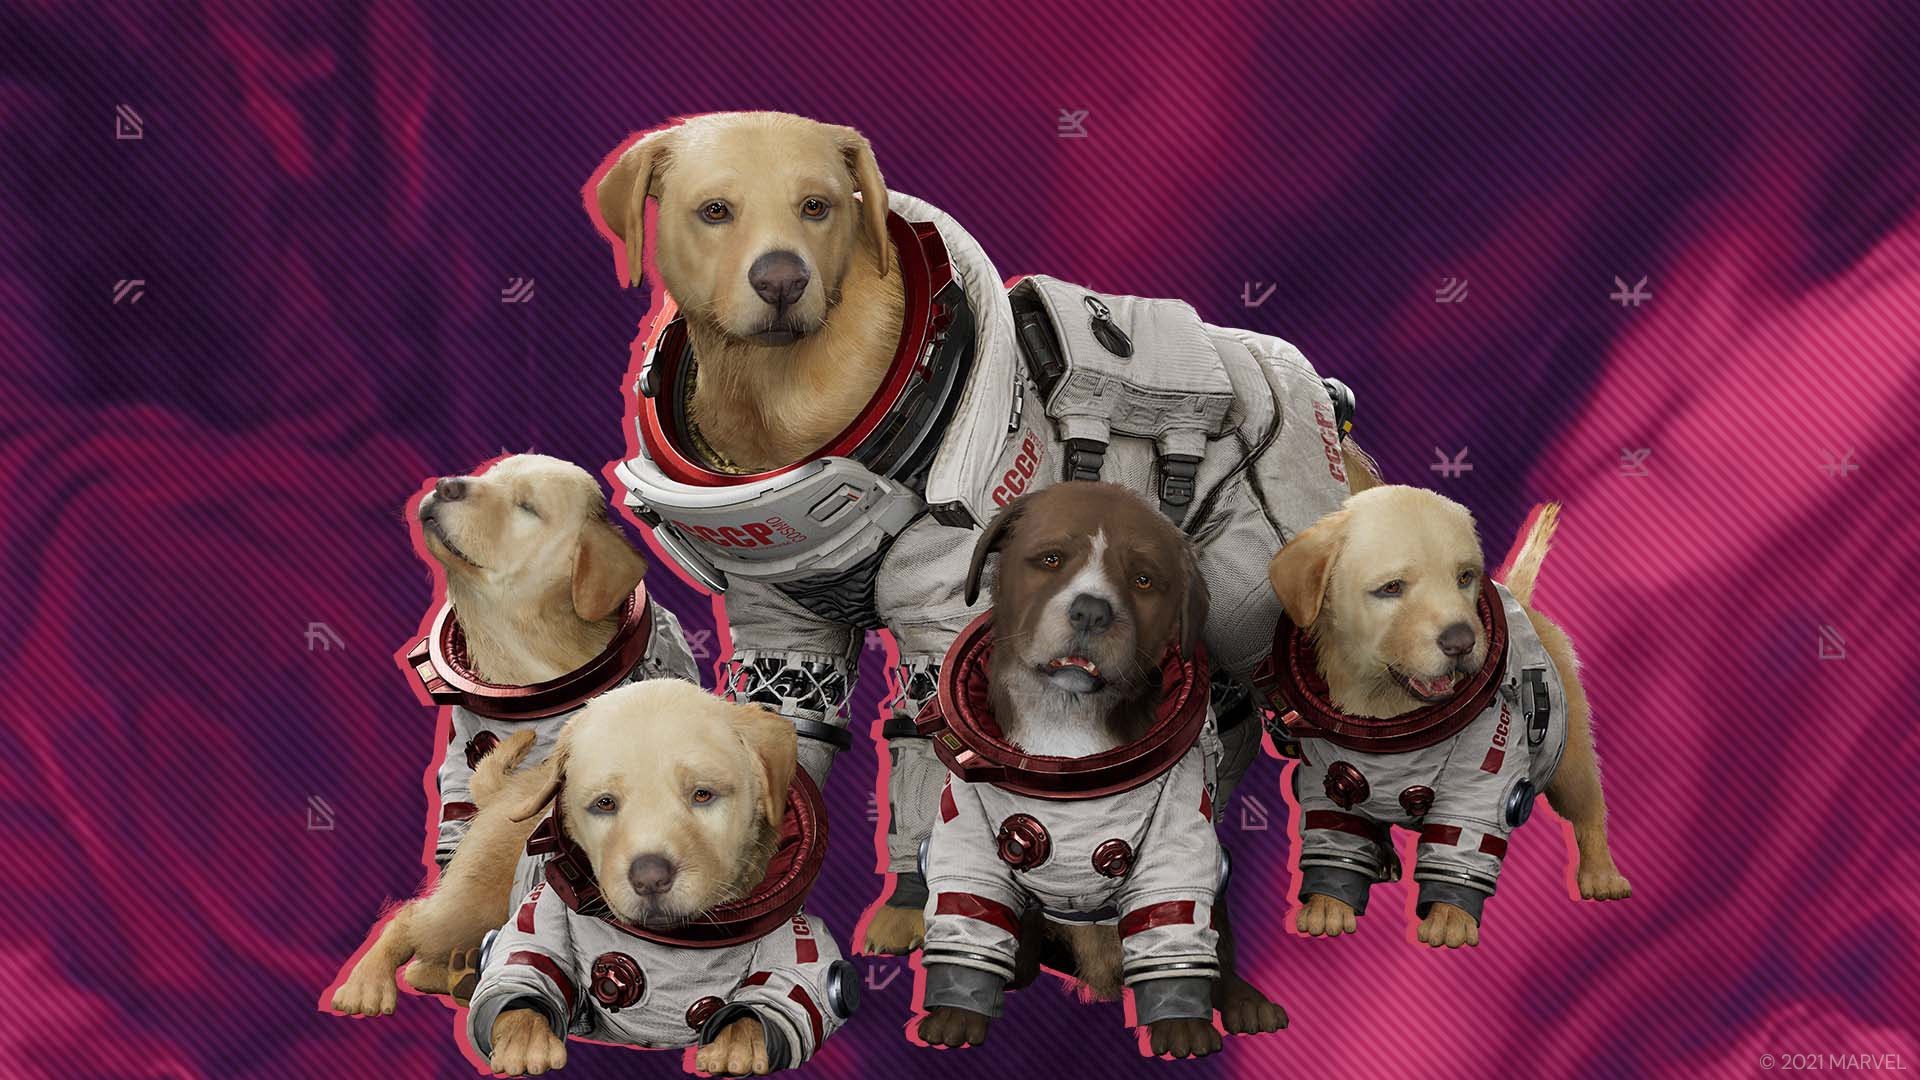 An image of Cosmo and the puppies from Marvel's Guardians of the Galaxy game